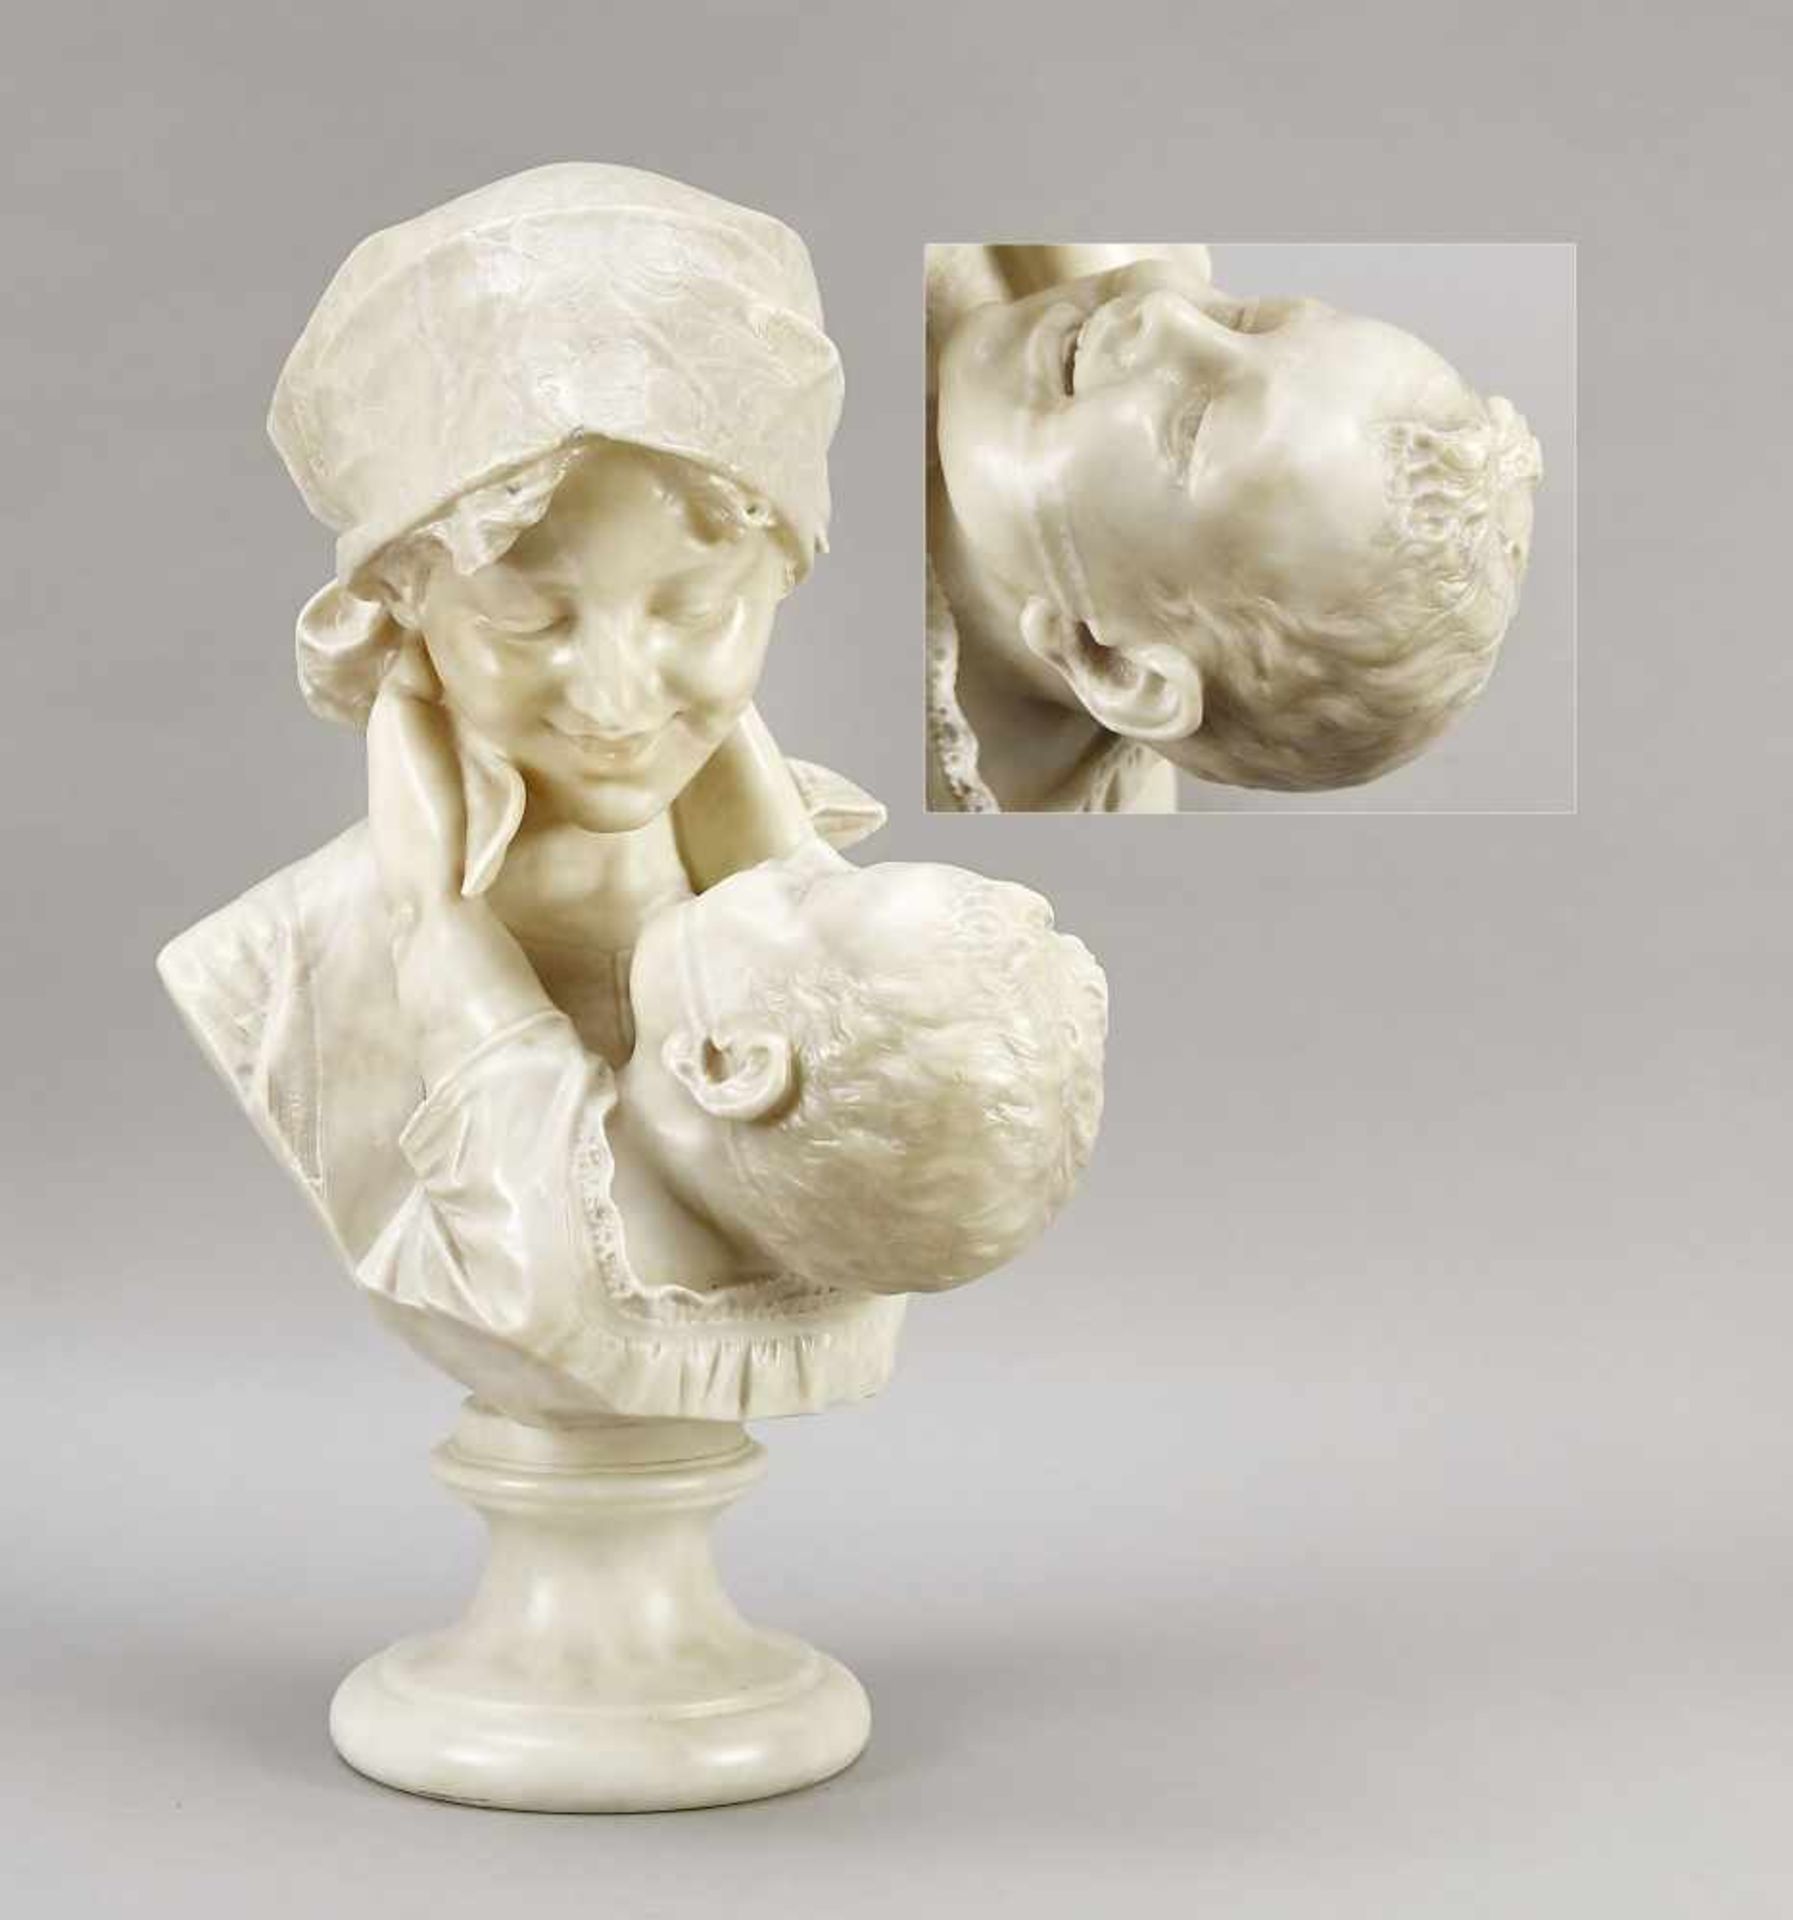 Jean Louis Grégoire (1840-1890), French sculptor, large alabaster bust one<